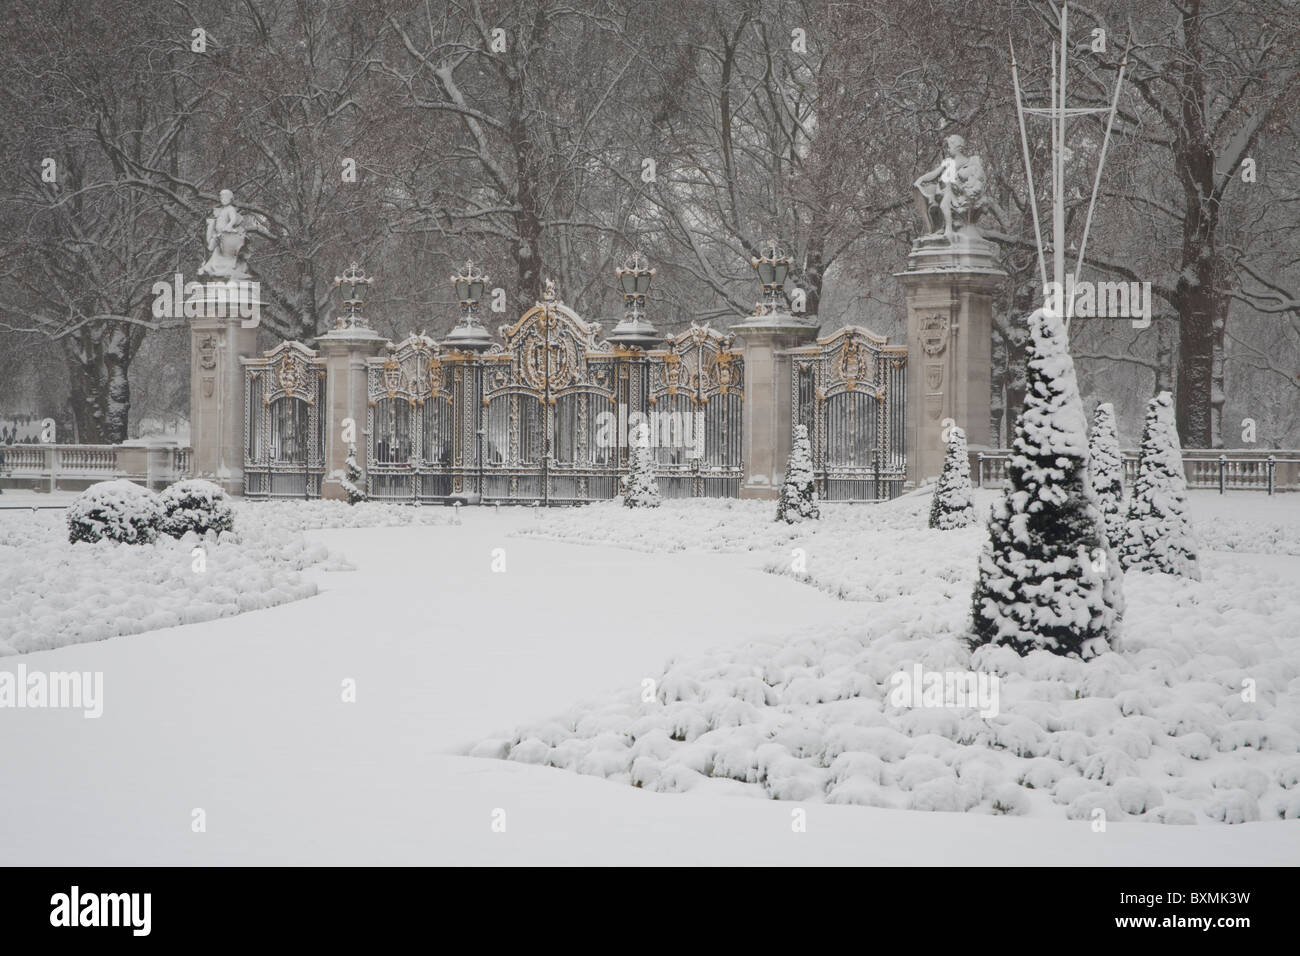 The beautifully ornate black and gold Canada Gate forming the 'Royal entrance' to Green Park in London during a heavy snow fall. Stock Photo